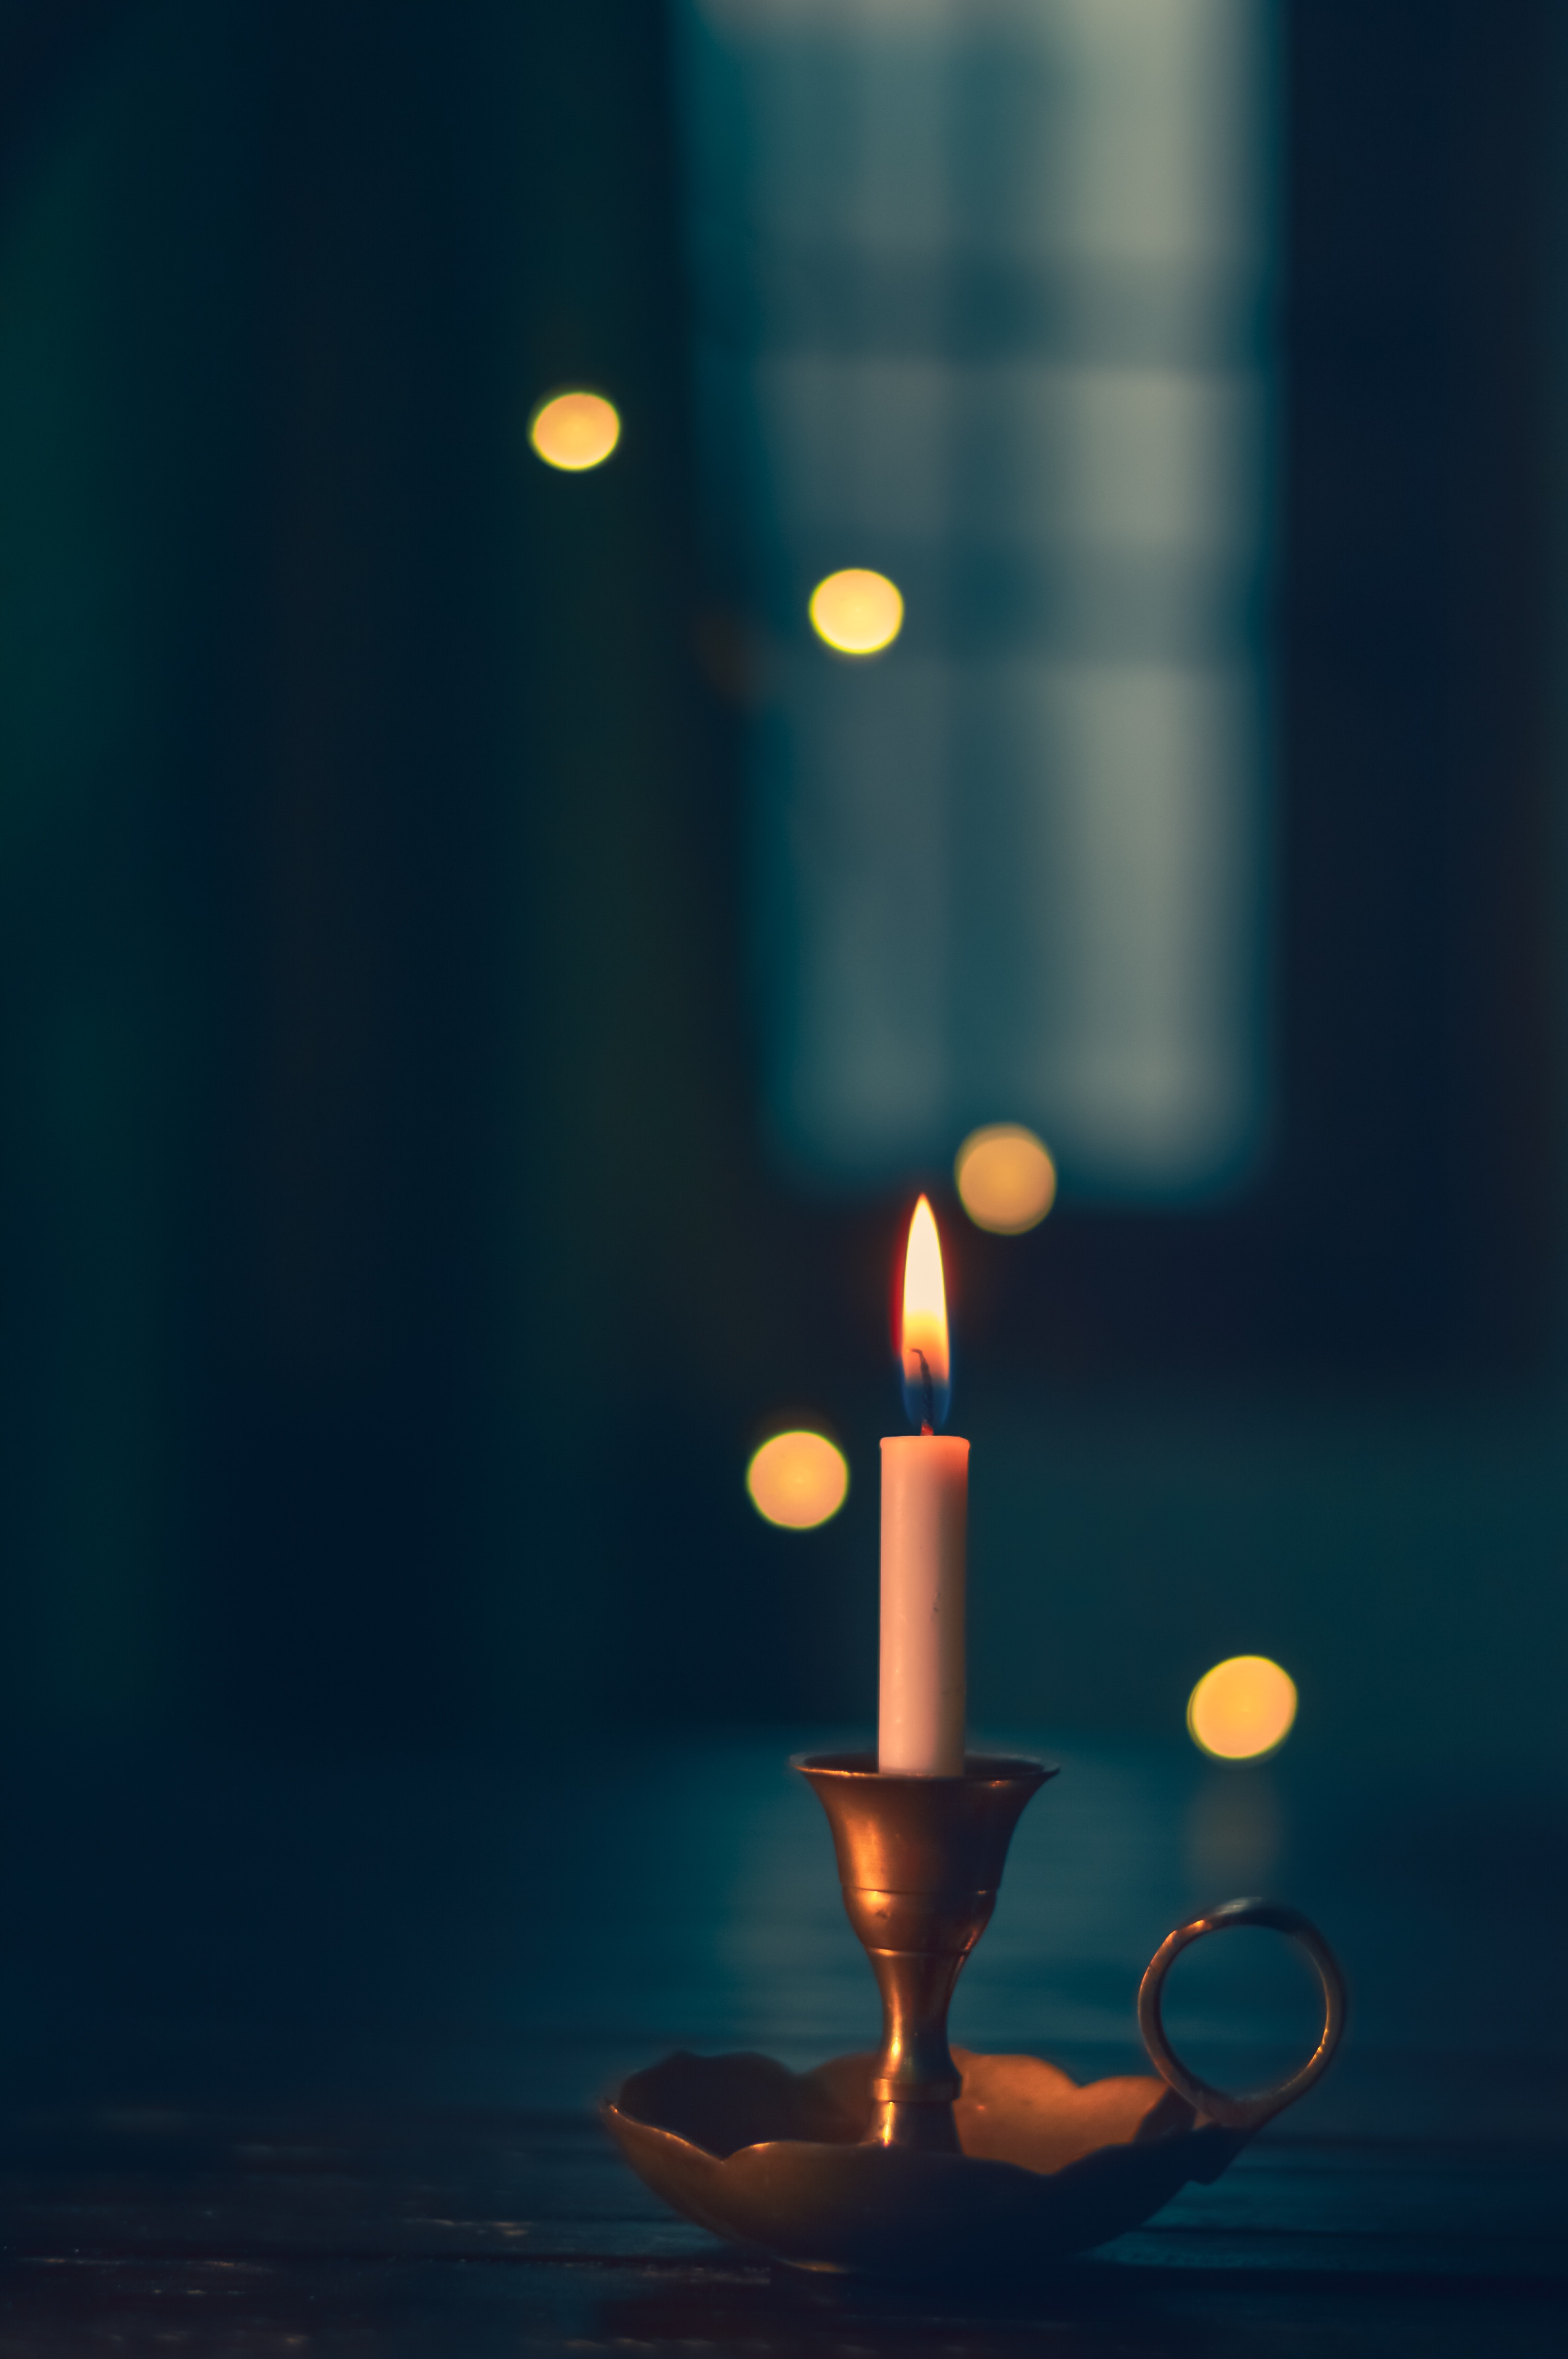 blur, miscellanea, candle, fire, wax, miscellaneous, smooth, wick, candlestick